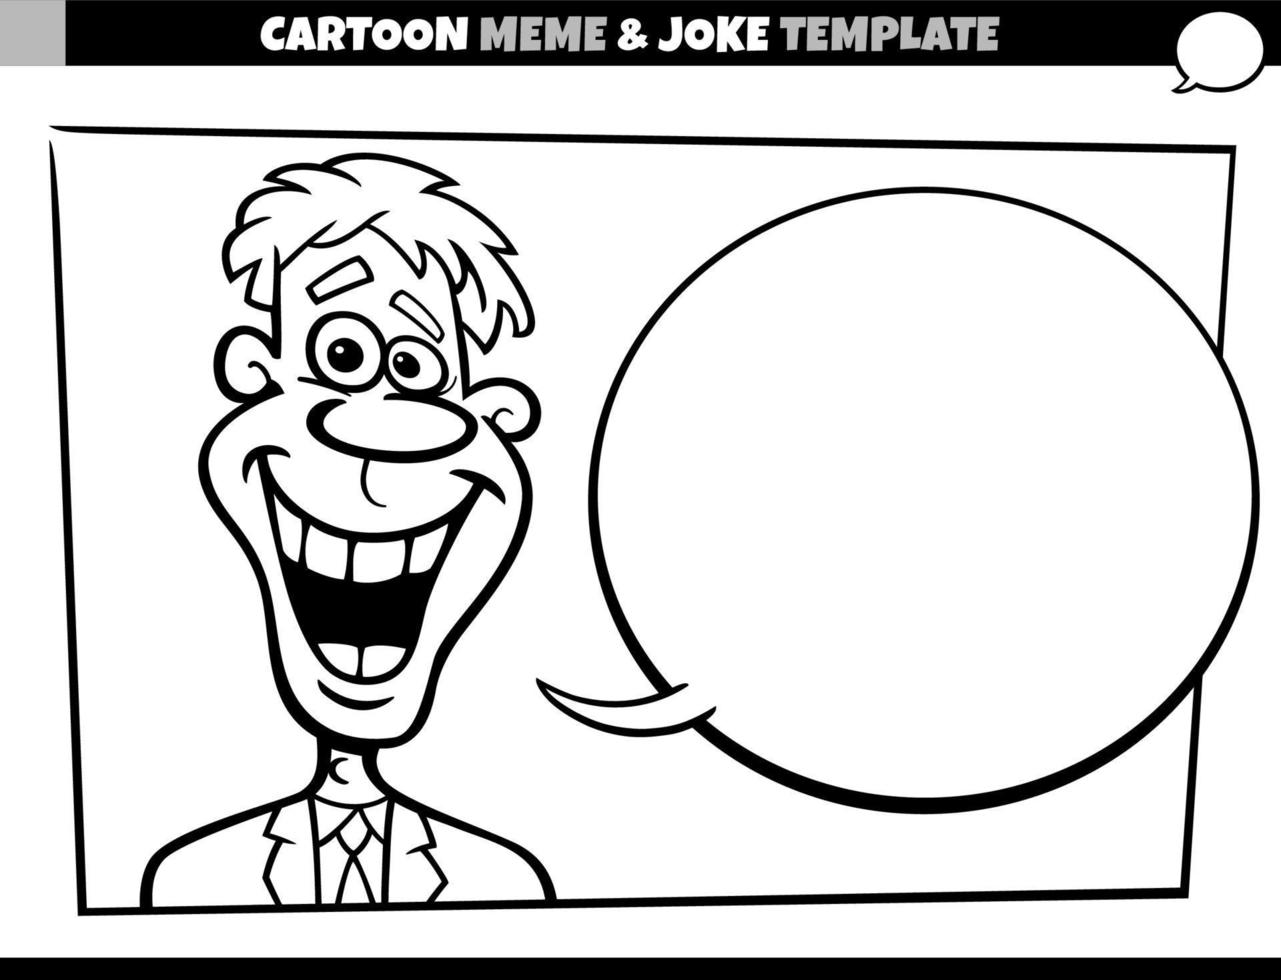 black and white cartoon meme template with comic guy vector